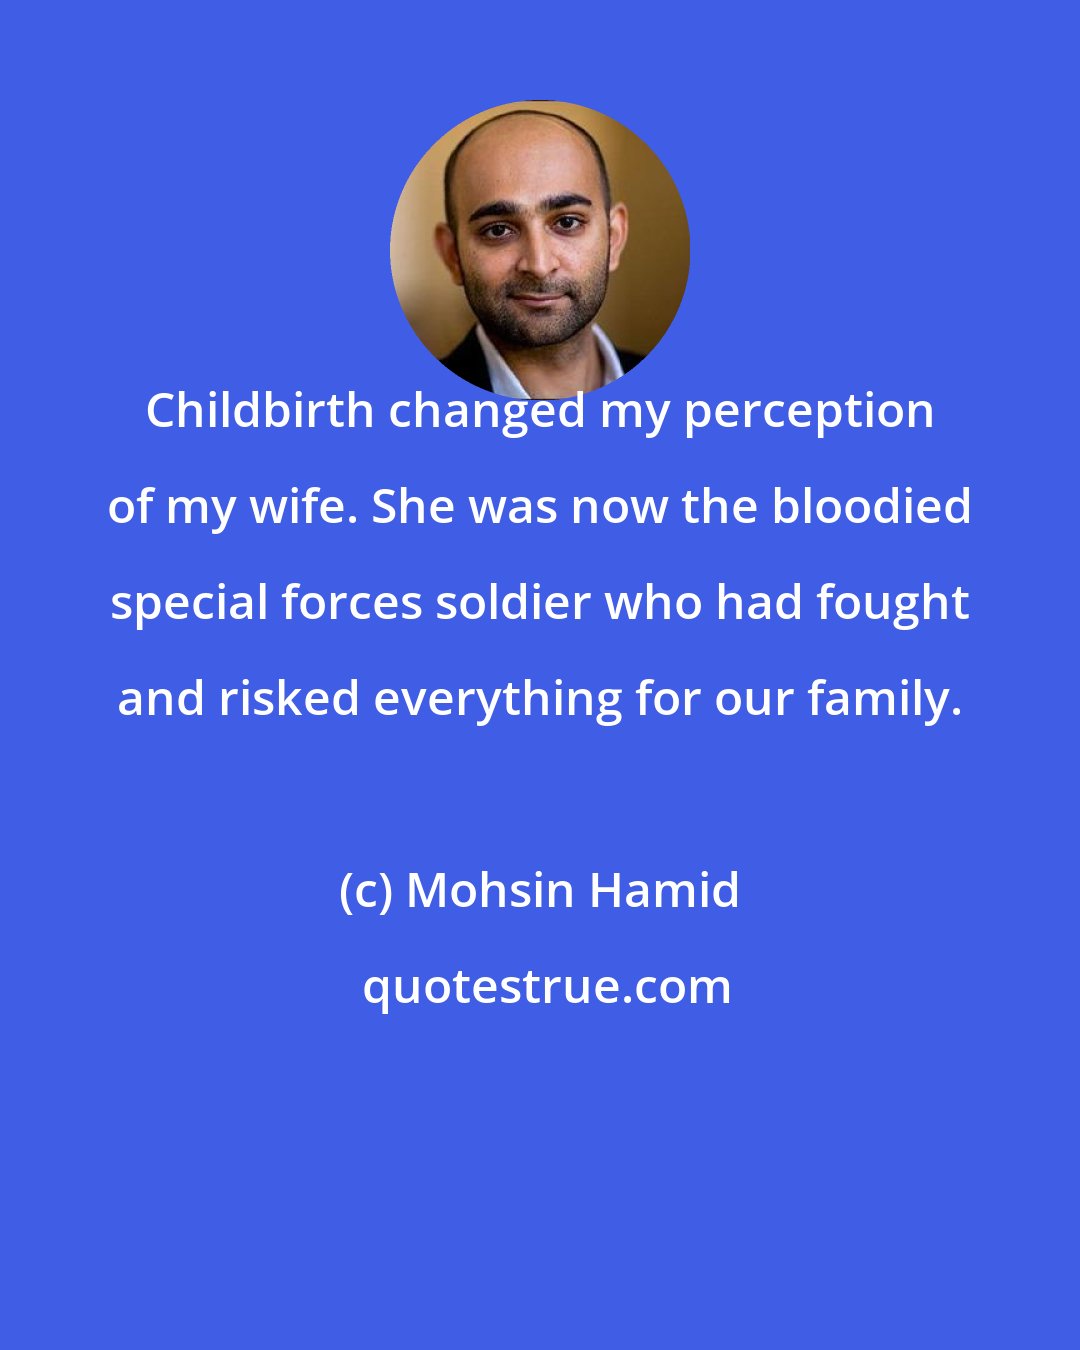 Mohsin Hamid: Childbirth changed my perception of my wife. She was now the bloodied special forces soldier who had fought and risked everything for our family.